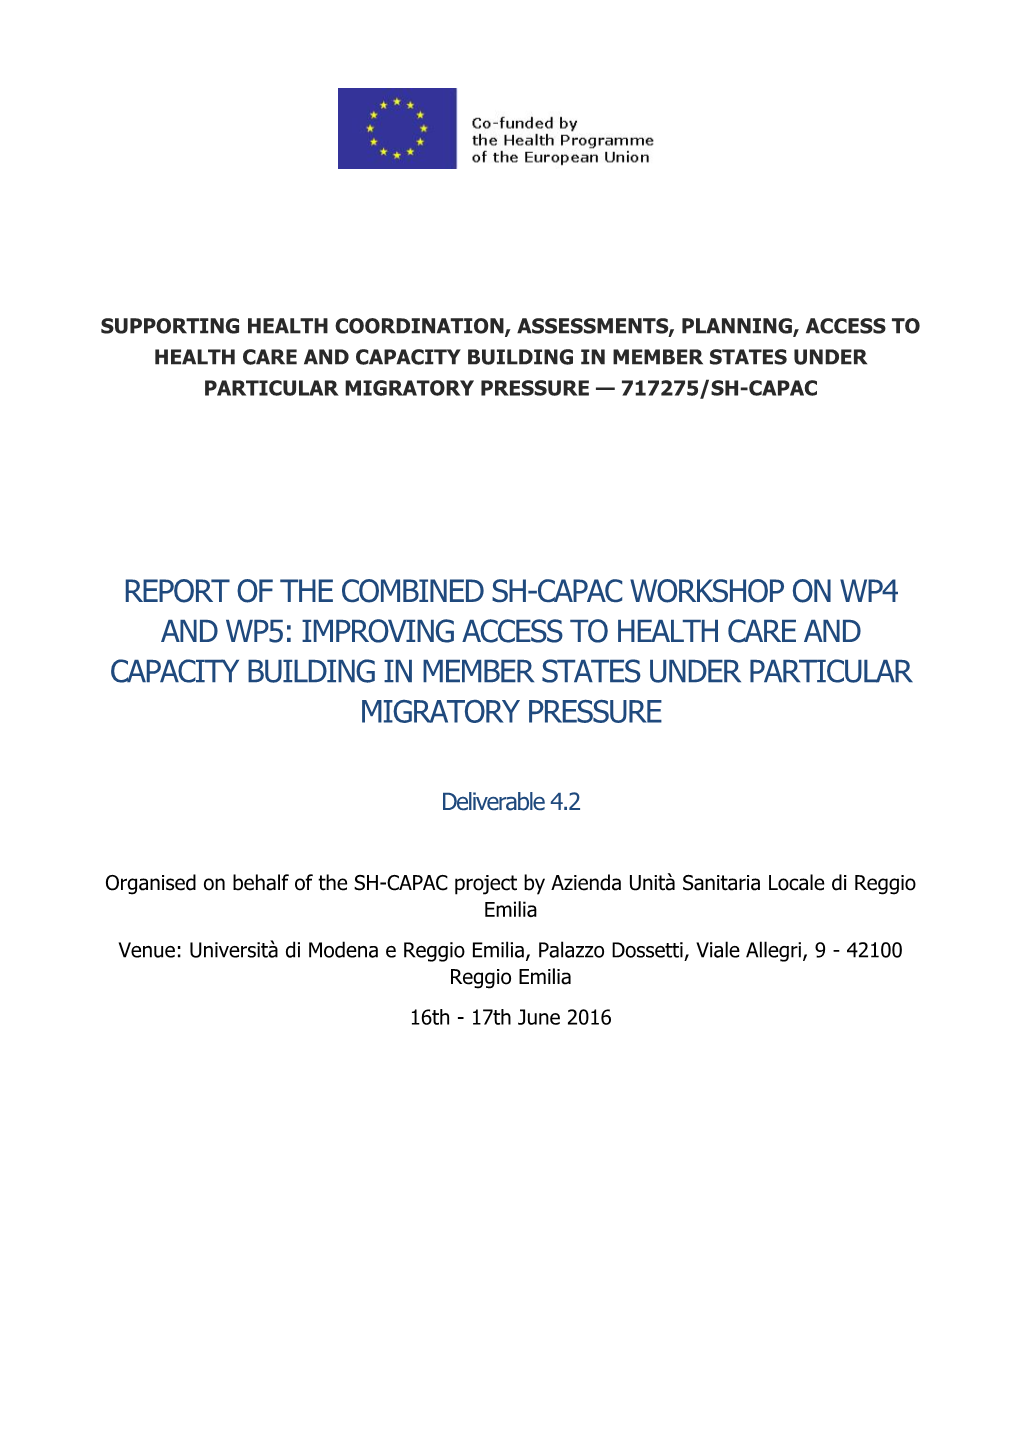 Report of the Combined Sh-Capac Workshop on Wp4 and Wp5: Improving Access to Health Care and Capacity Building in Member States Under Particular Migratory Pressure